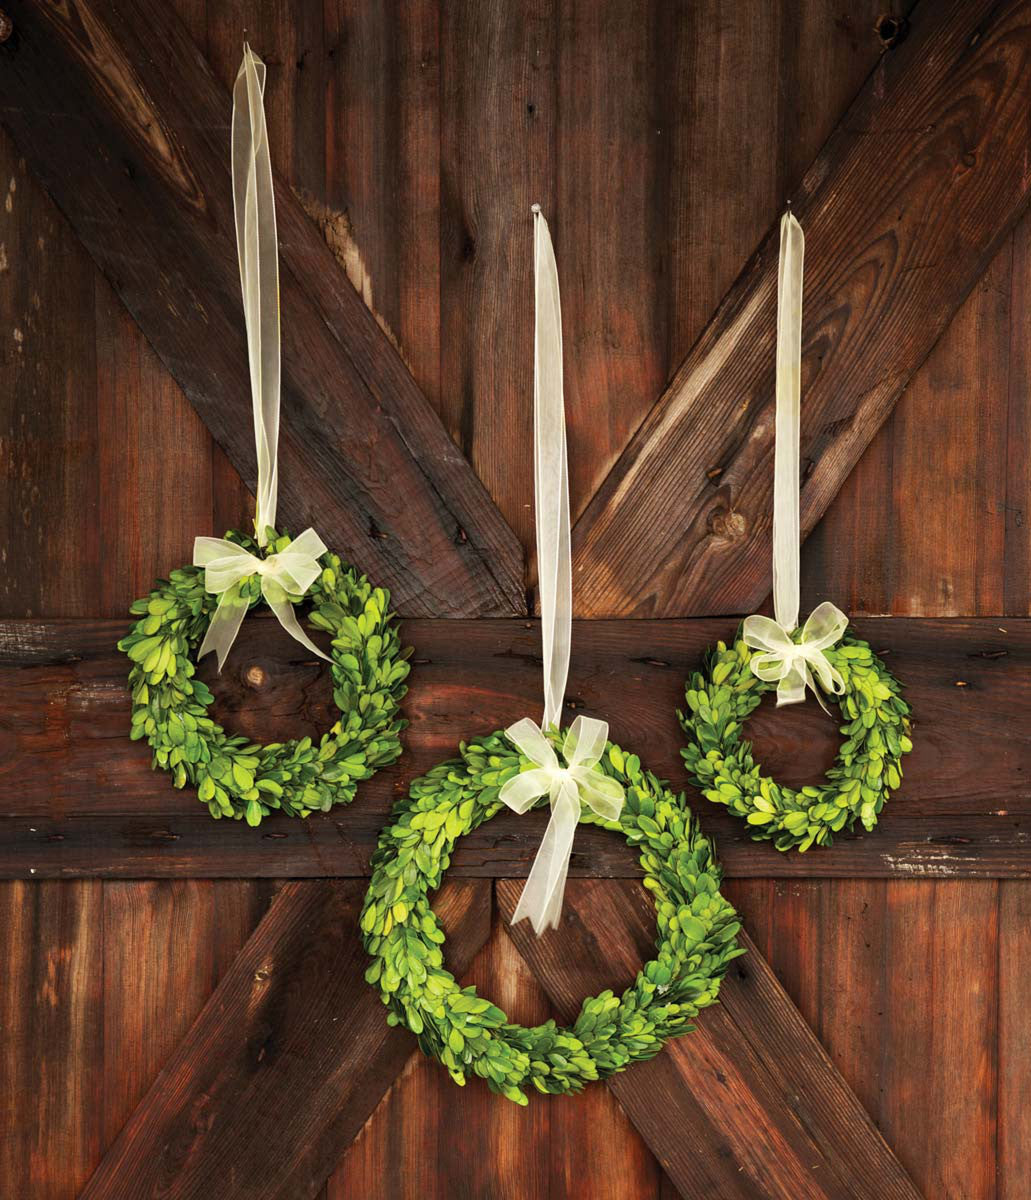 Preserved Boxwood Wreaths with Ivory Ribbon - Set of 3